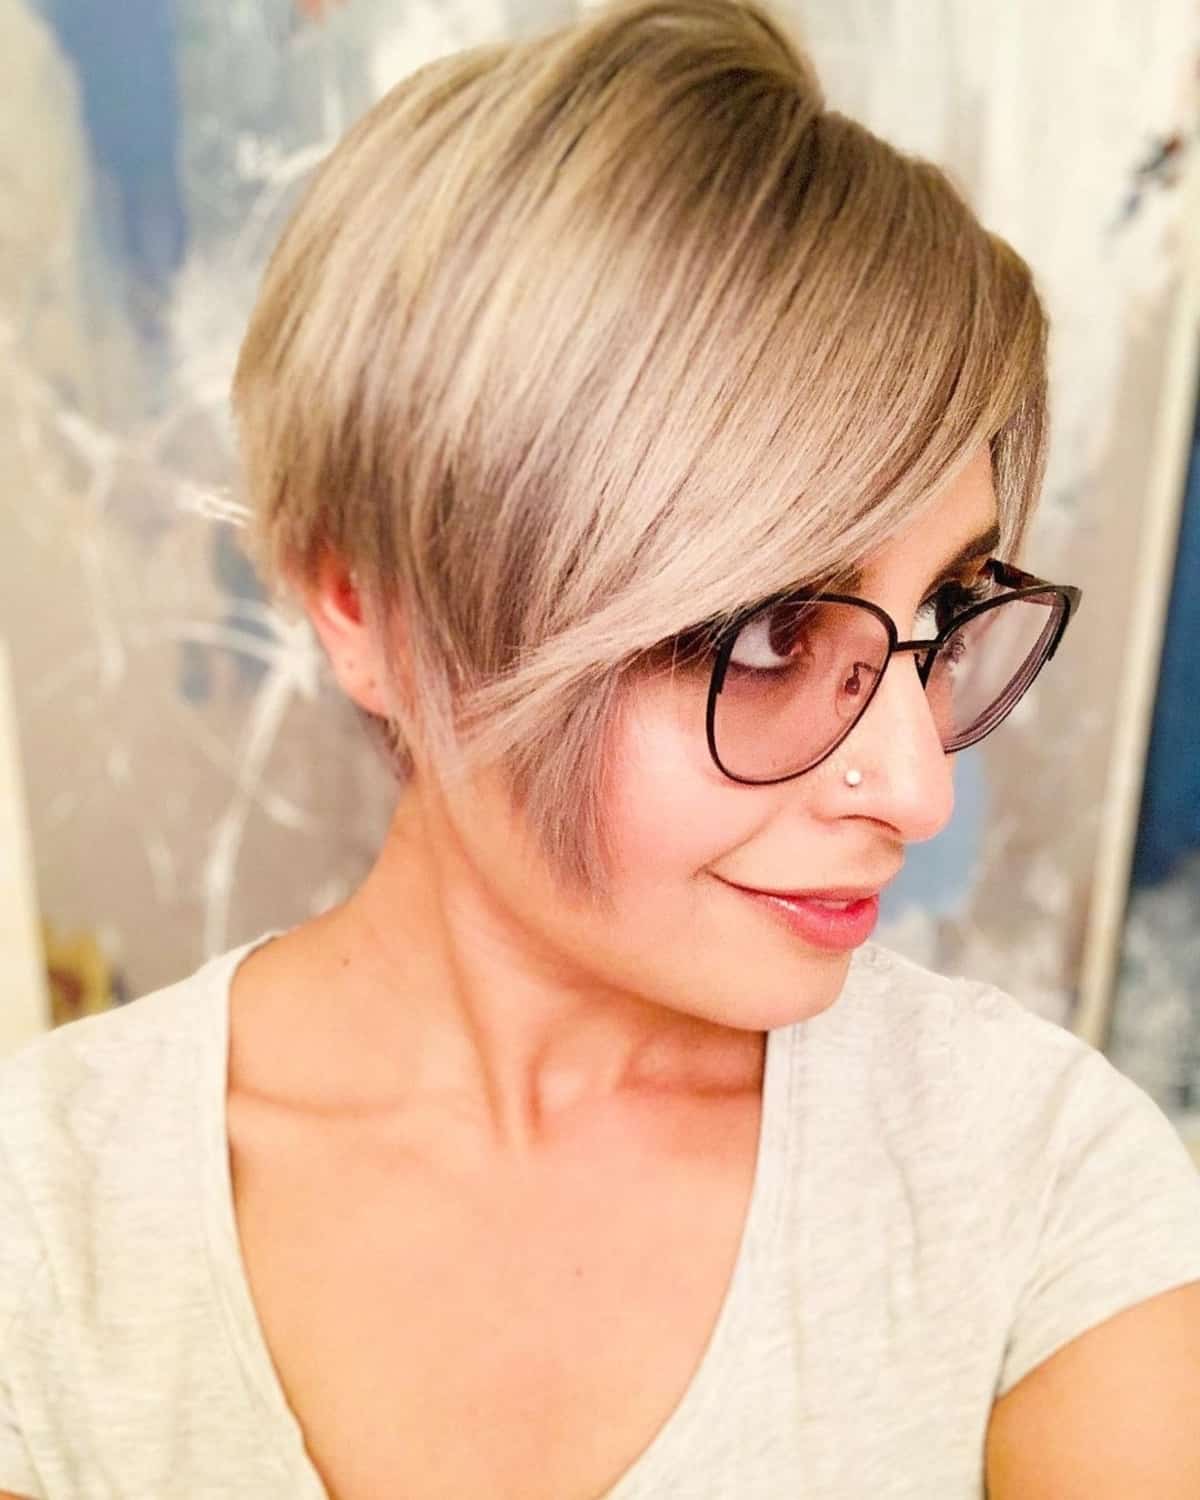 The classic pixie cut for women with glasses and thin hair